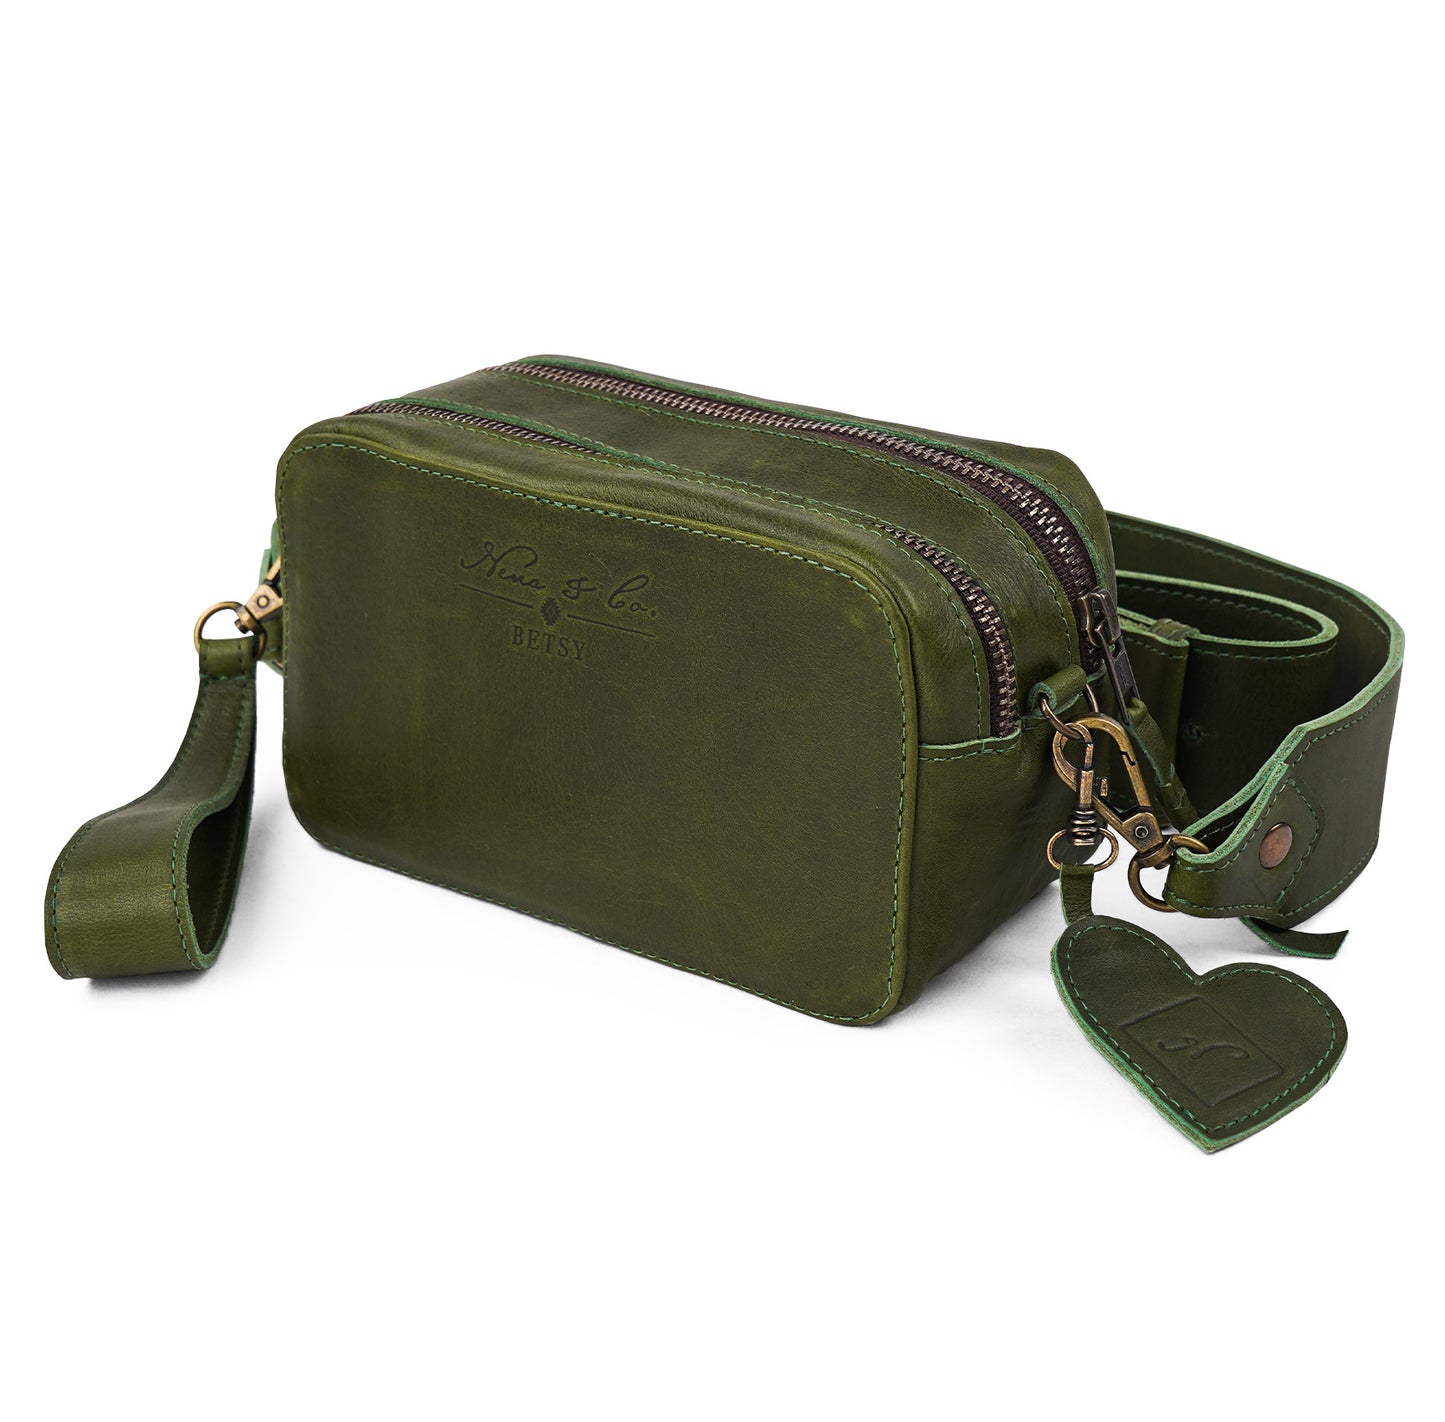 BETSY'S ESSENTIALS BAG - FULL LEATHER COLLECTION - DEEP EMERALD